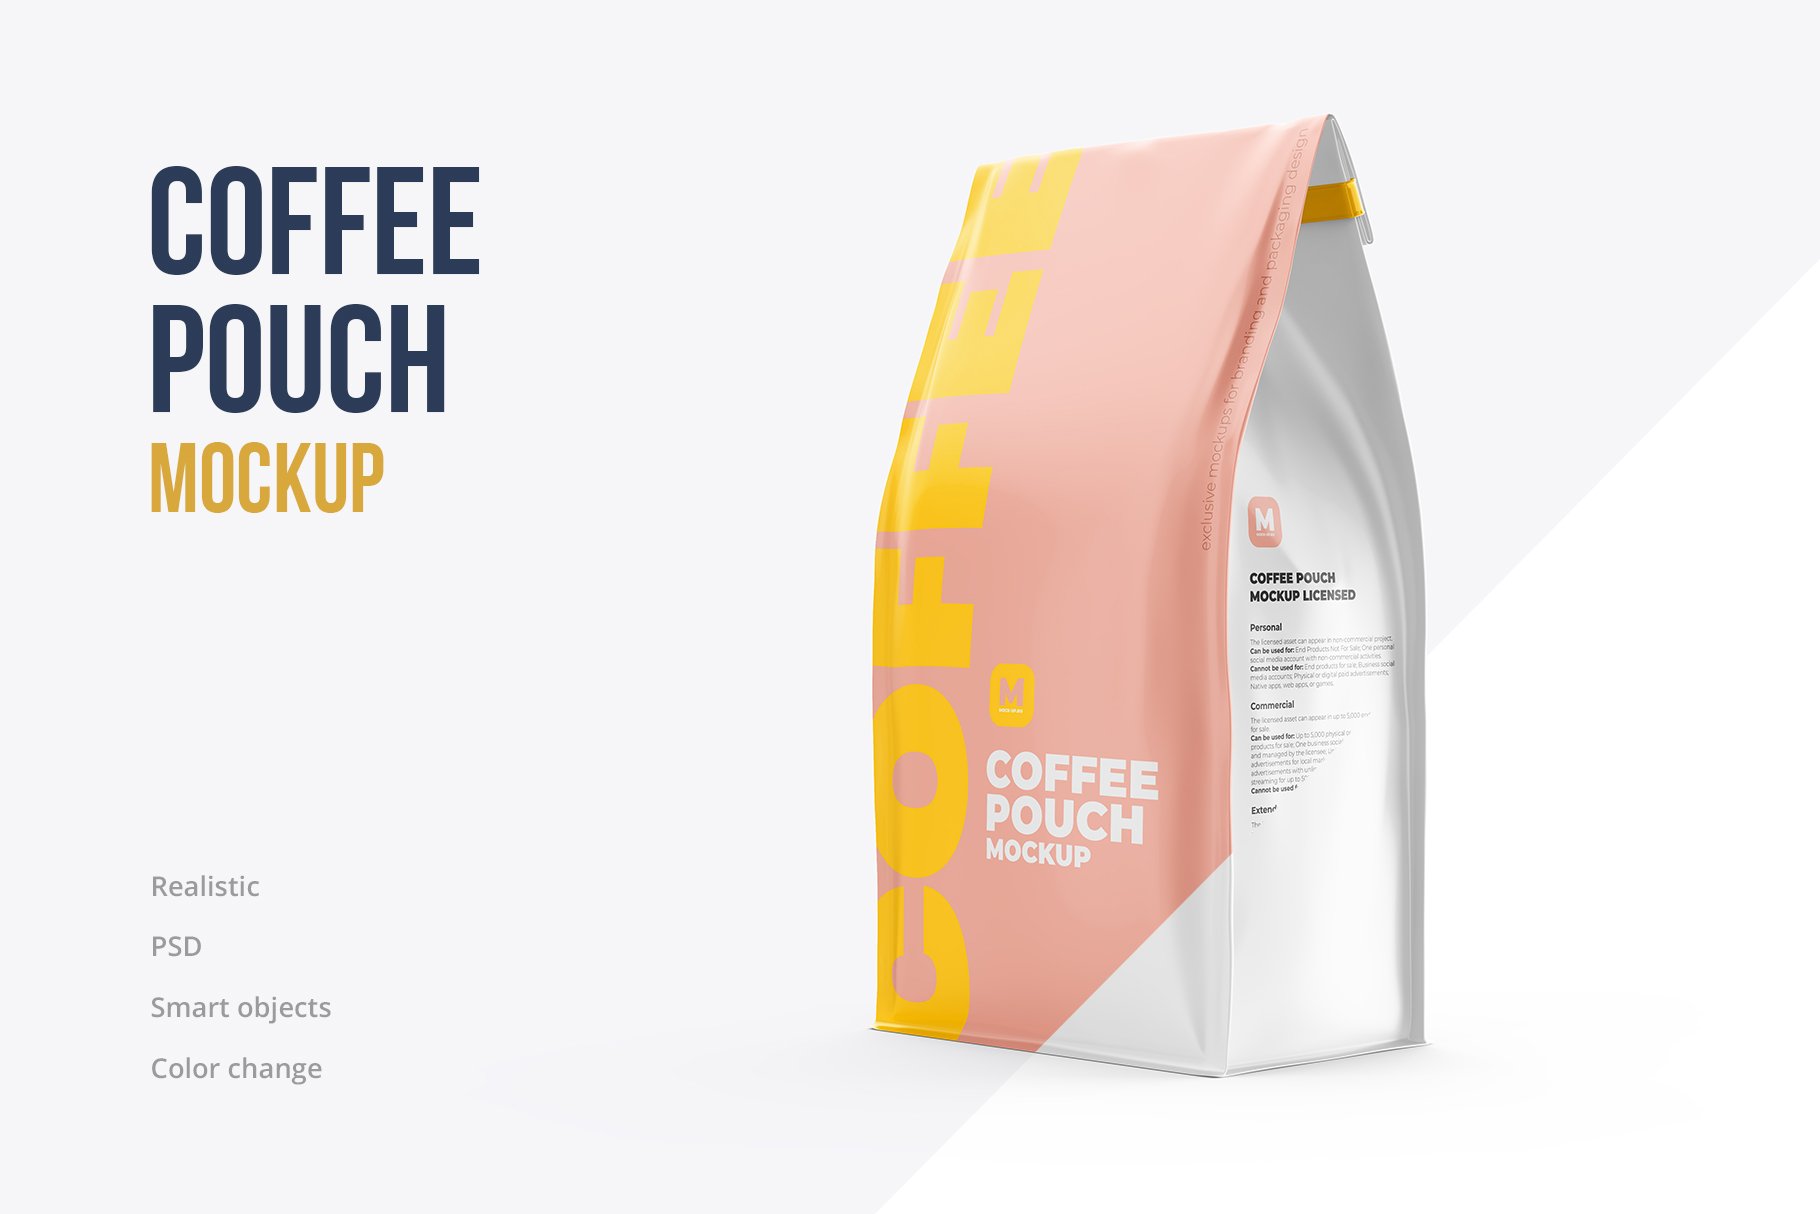 Coffee Pouch Mockup Half-Side view cover image.